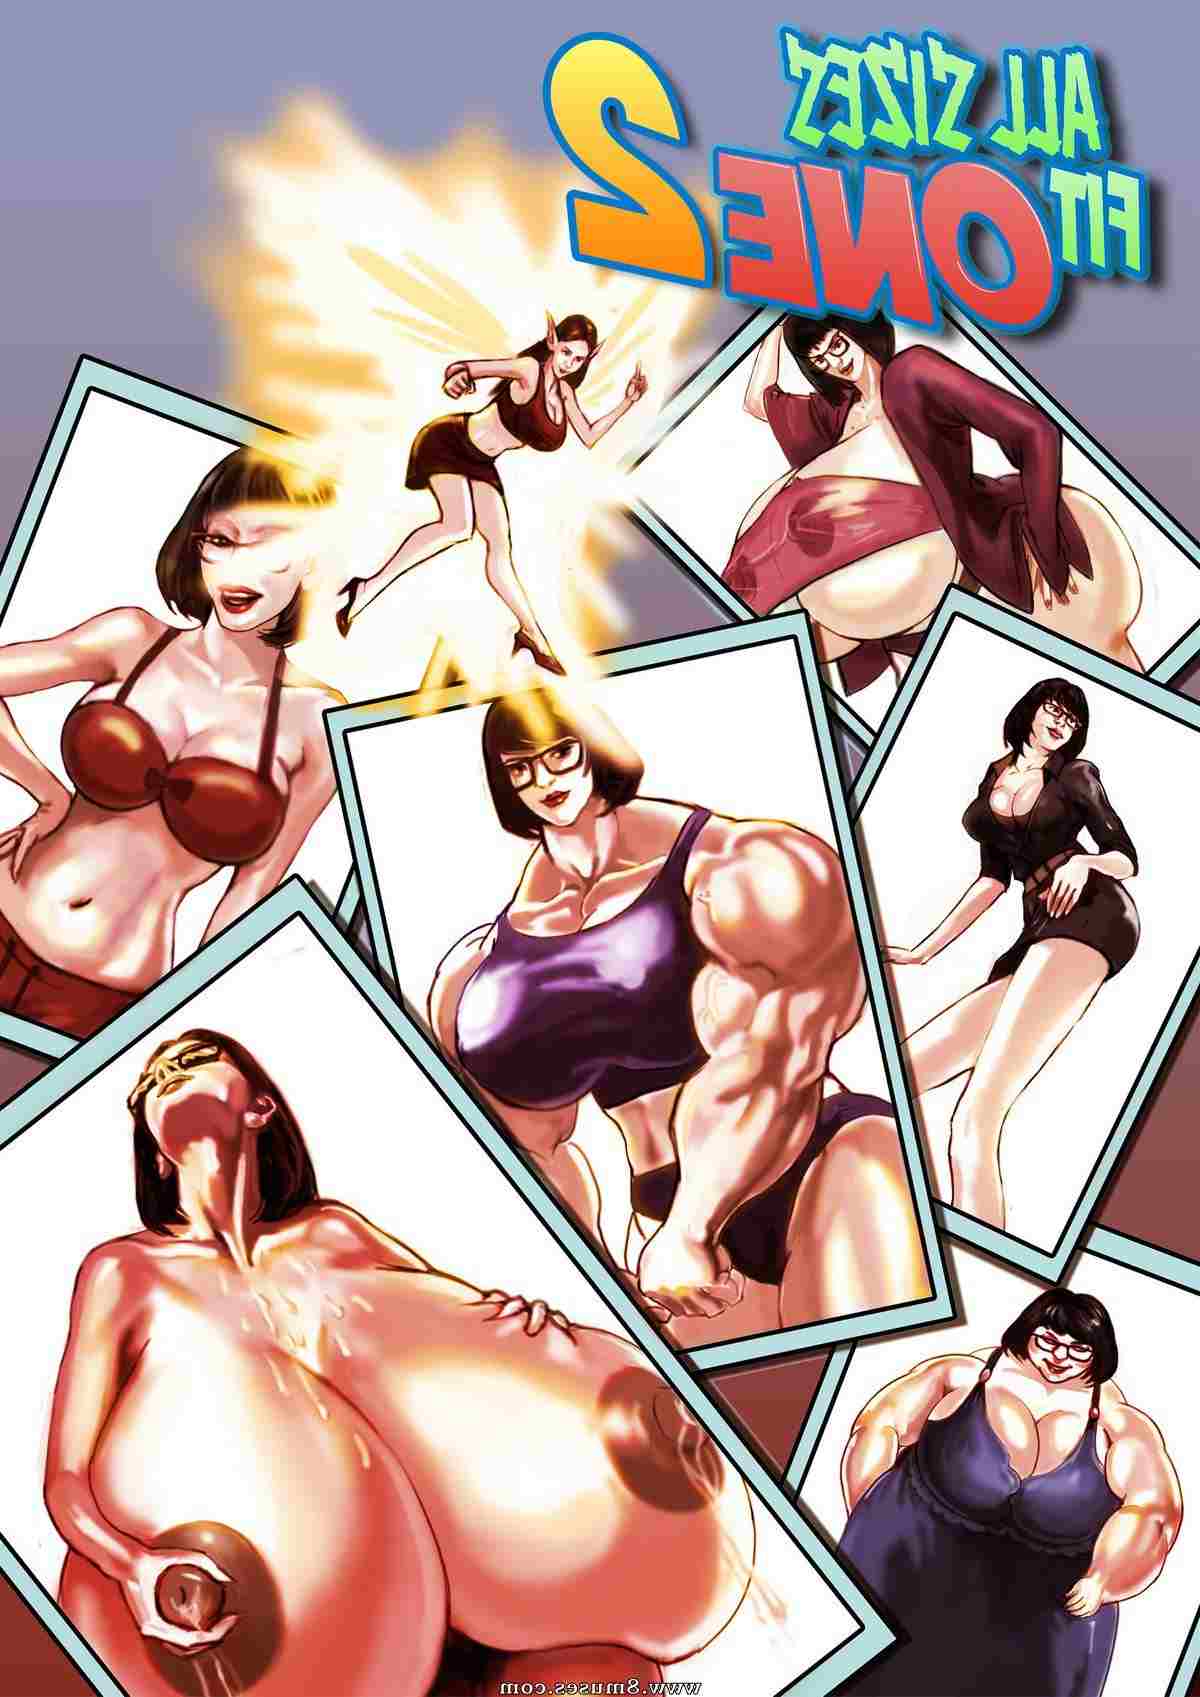 Expansionfan-Comics/All-Sizes-Fit-One/All-Sizes-Fit-One-02 All_Sizes_Fit_One_02__8muses_-_Sex_and_Porn_Comics.jpg